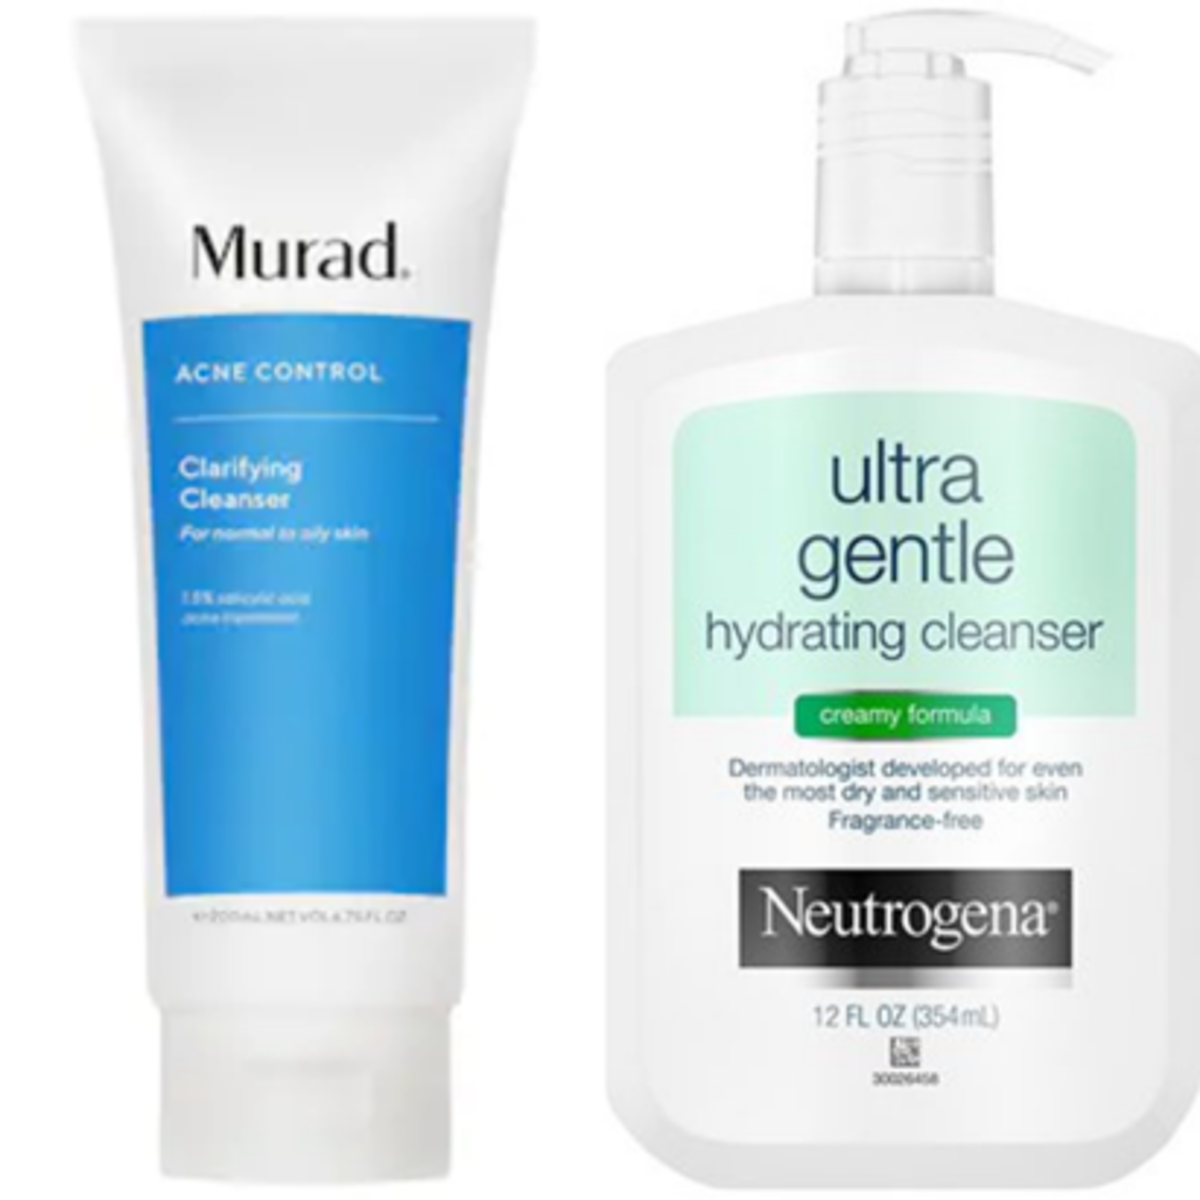 The two cleansers I use depending on what I need that day. Neutrogena for daily use, and Murad for acne breakouts. 